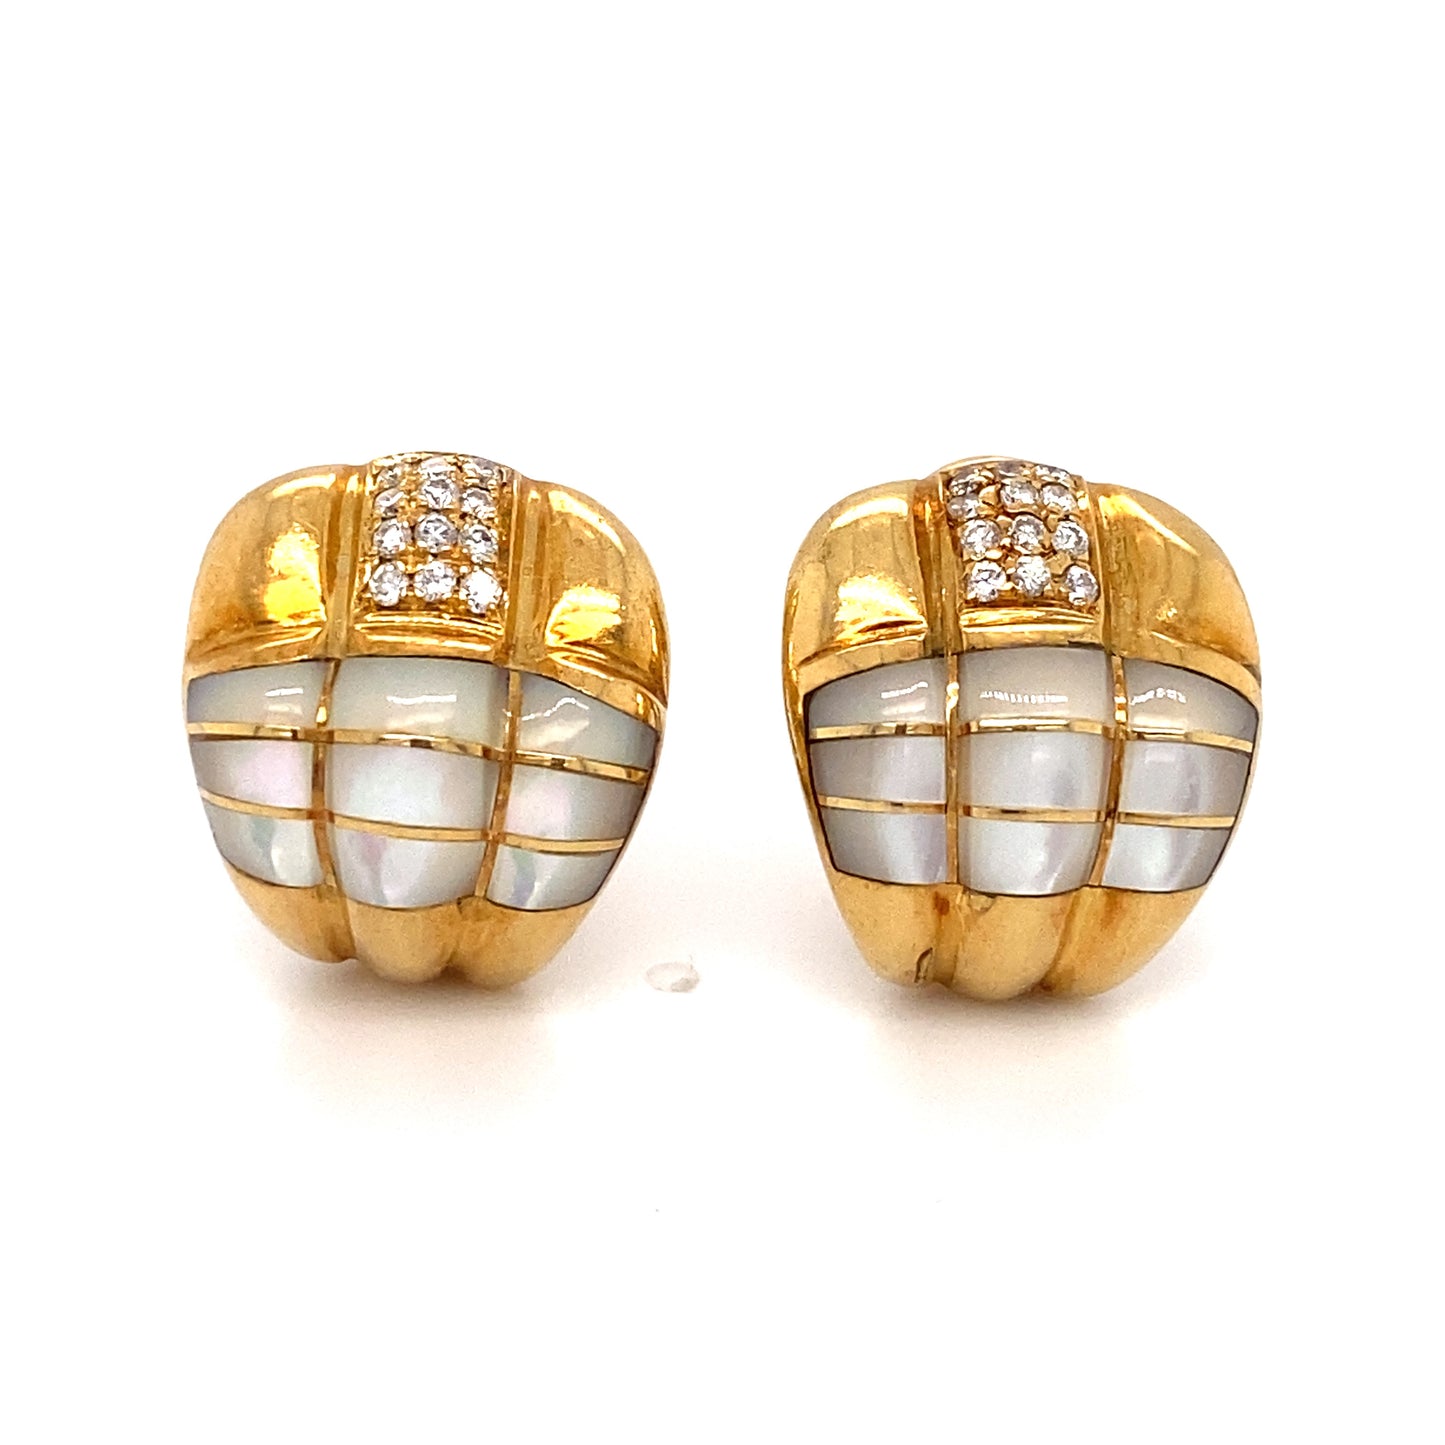 Circa 1960s Italian Mother of Pearl and Diamond Clip-On Earrings in 18K Gold